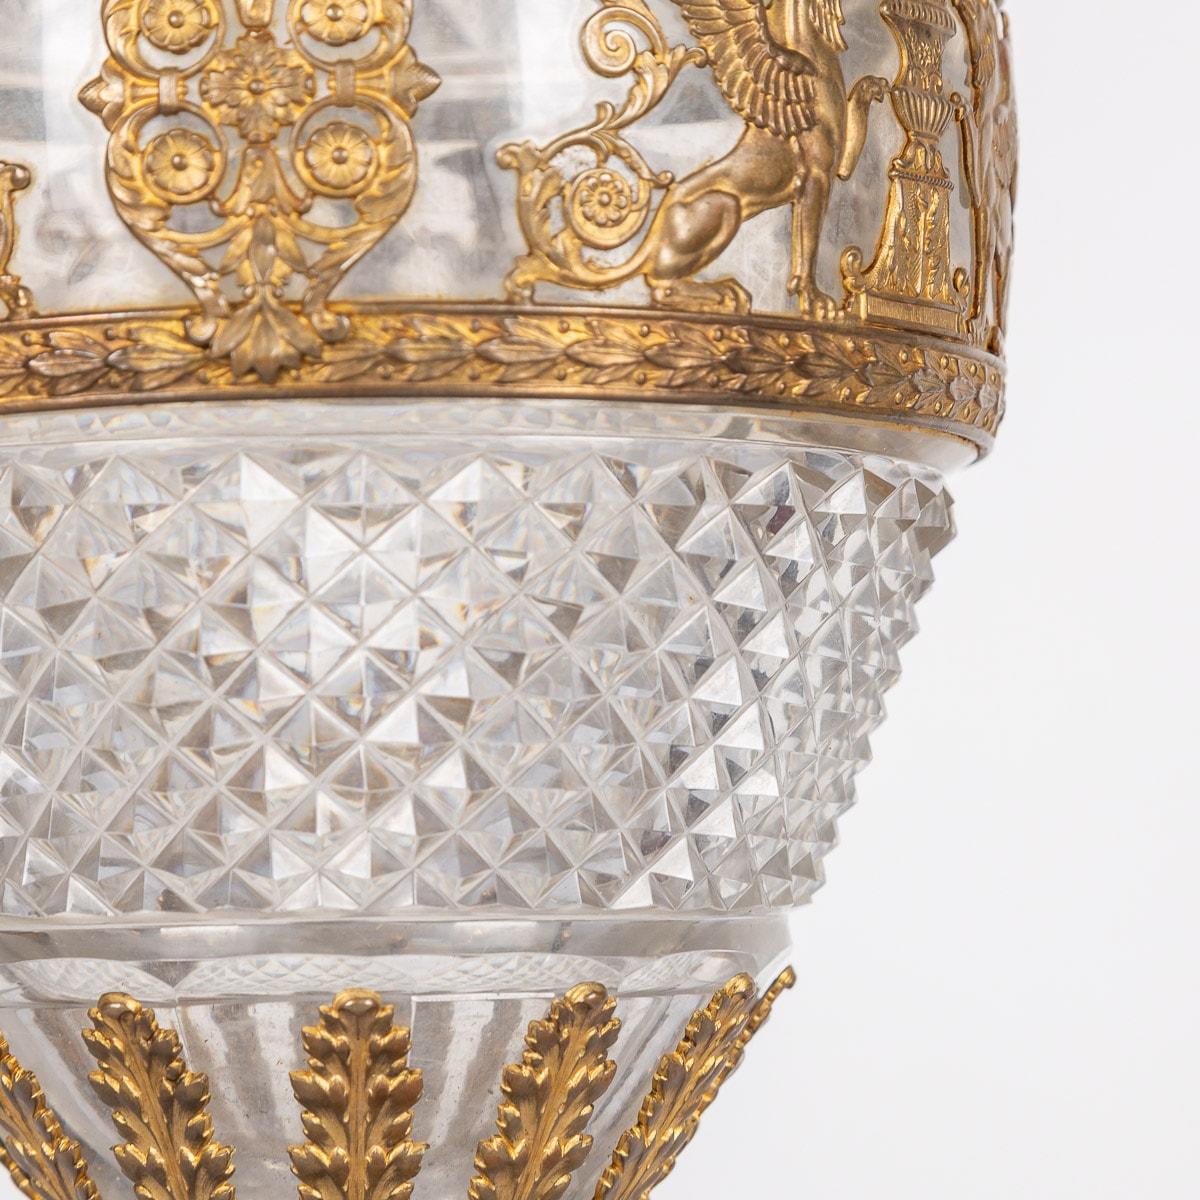 20th Century French Gold Plated & Baccarat Glass Vase, c.1900 For Sale 10